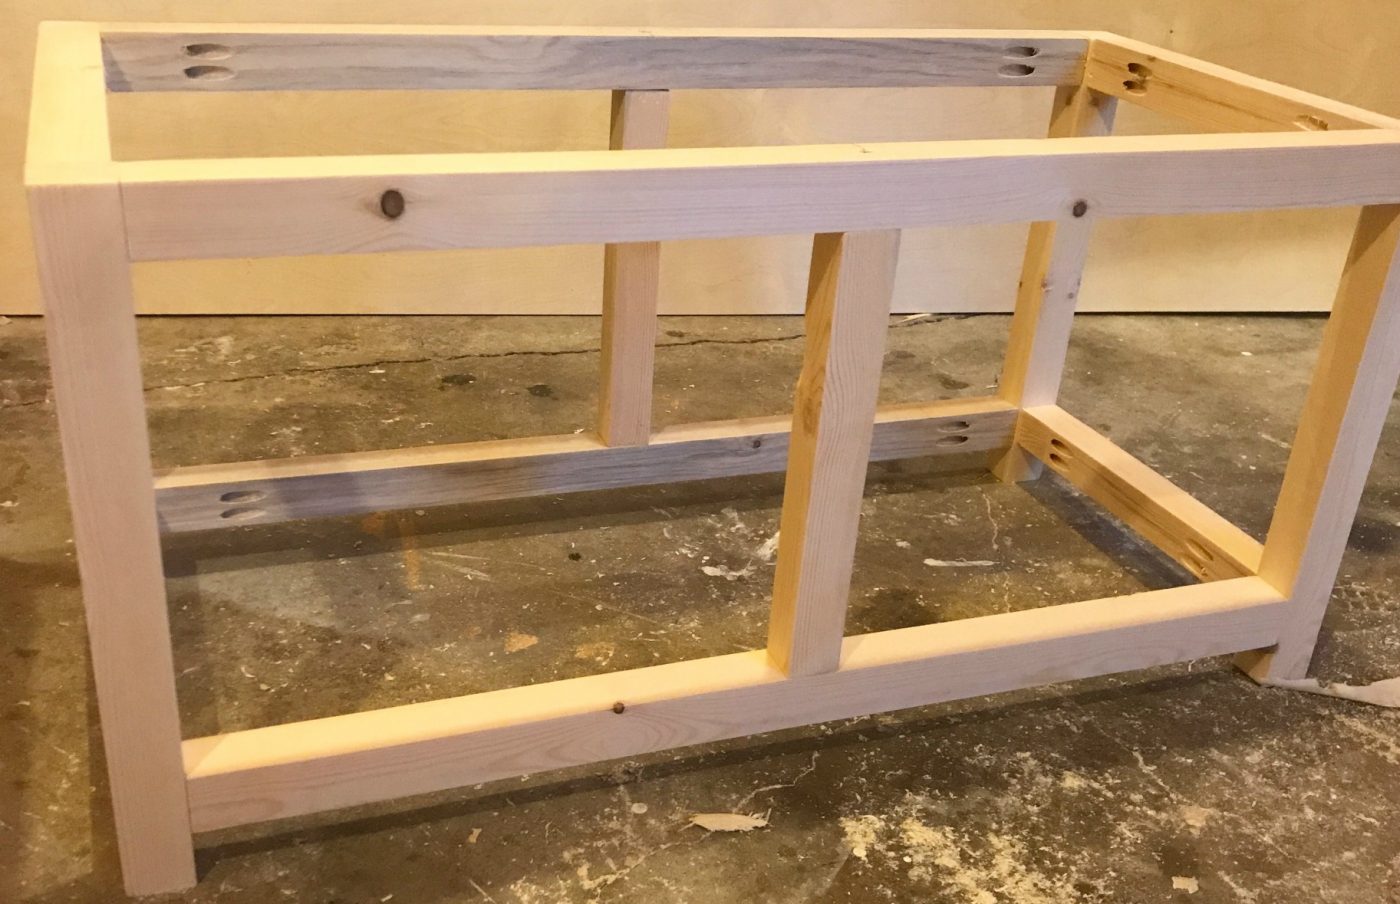 Add middle divider to the storage chest frame